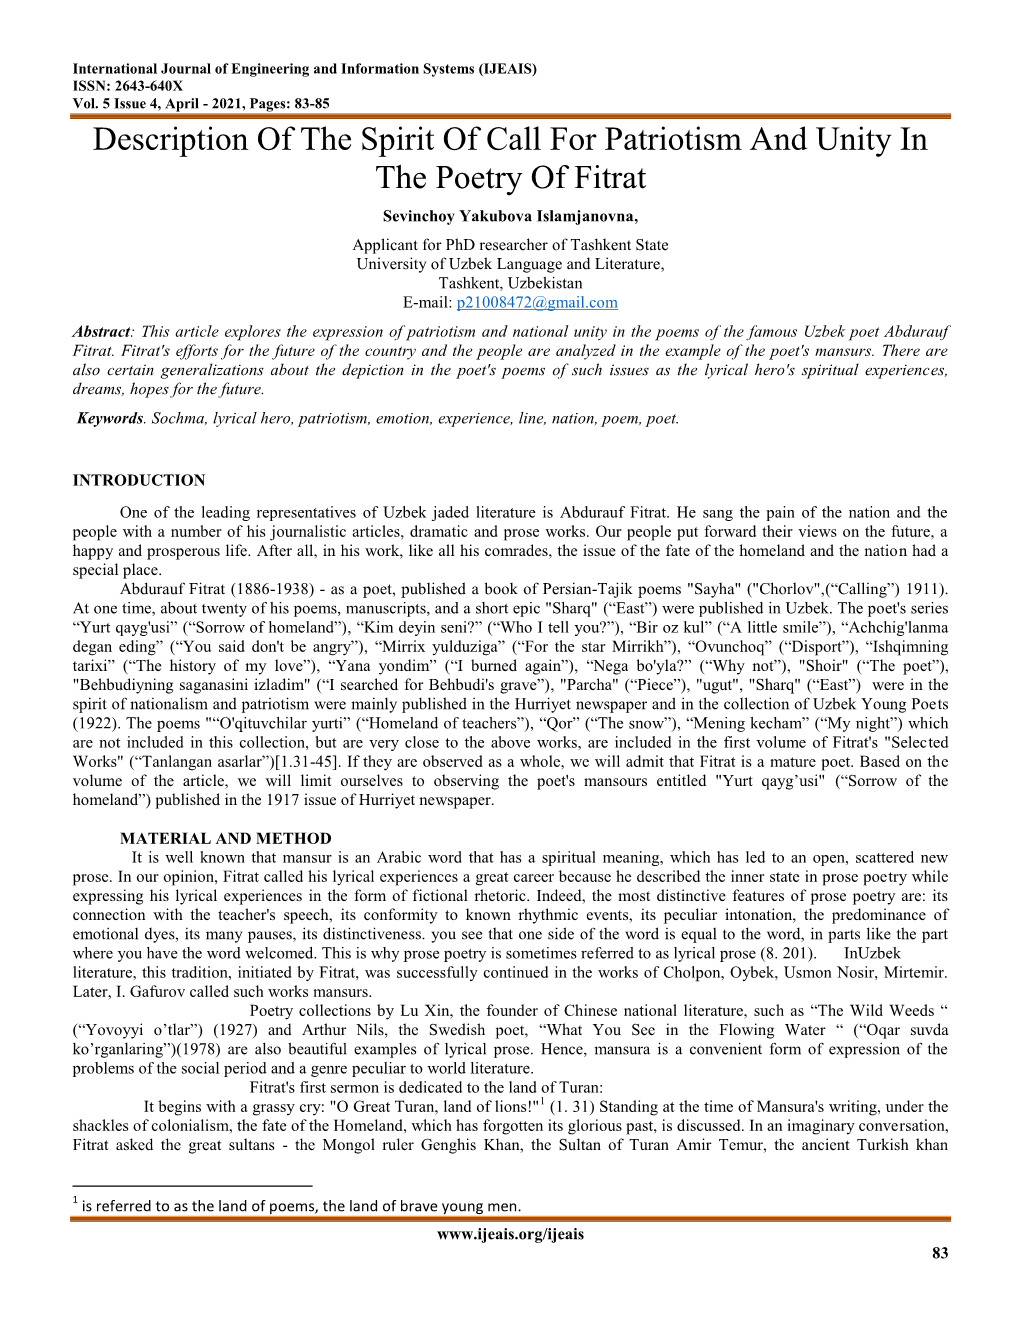 Description of the Spirit of Call for Patriotism and Unity in the Poetry of Fitrat